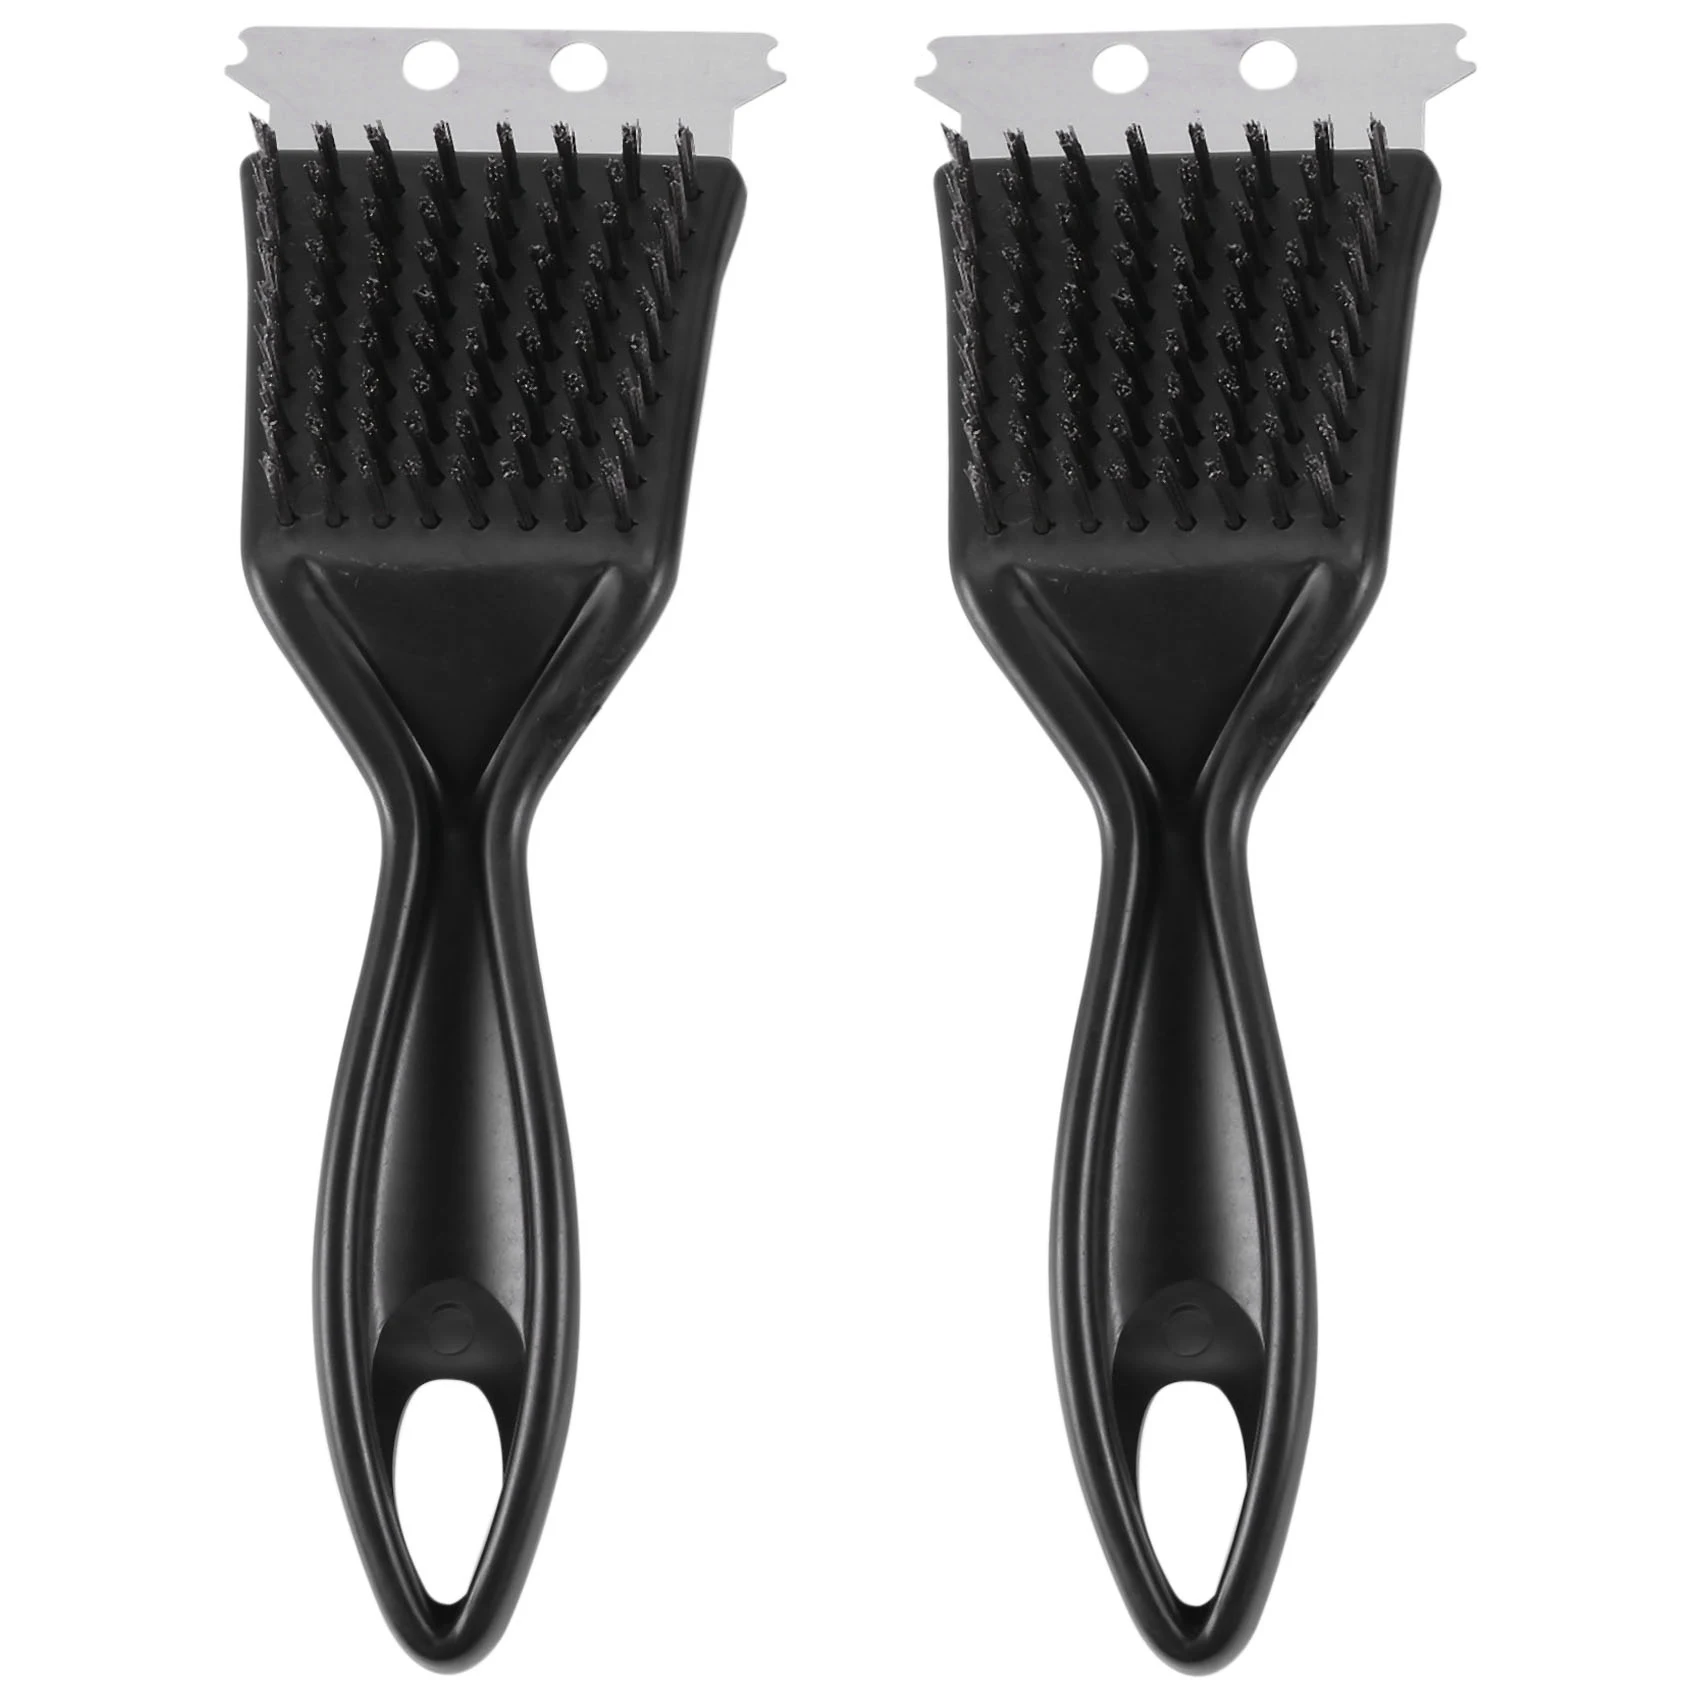 

BBQ Grill Brush Grill Cleaner Barbecue Grill Brush and Scraper Non Scratch Cleaning Best for Any Grill 2 Pieces